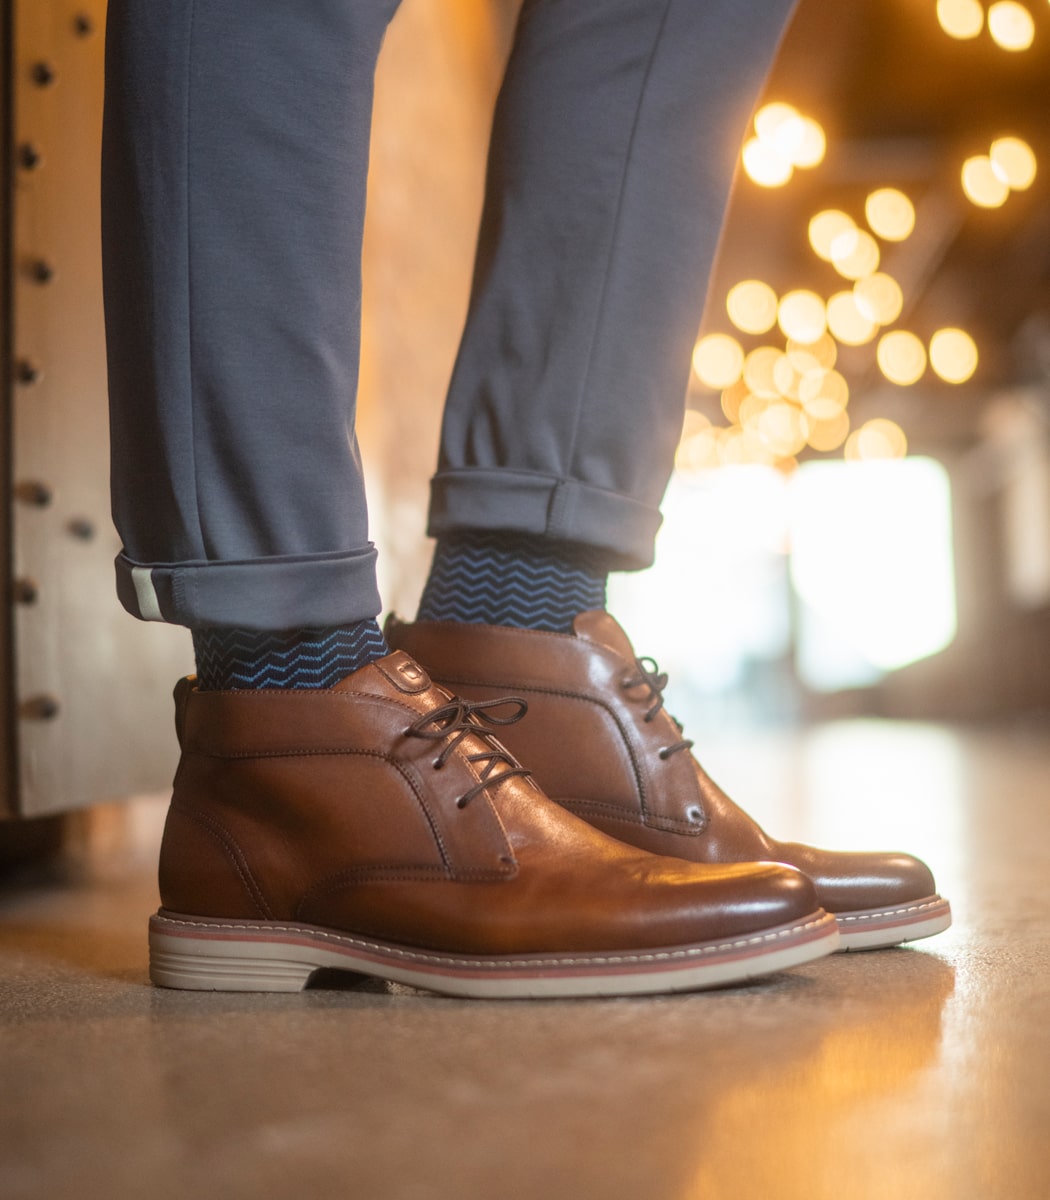 The featured image is a model wearing the Norwalk Plain Toe Chukka Boot in Cognac Tumbled. 